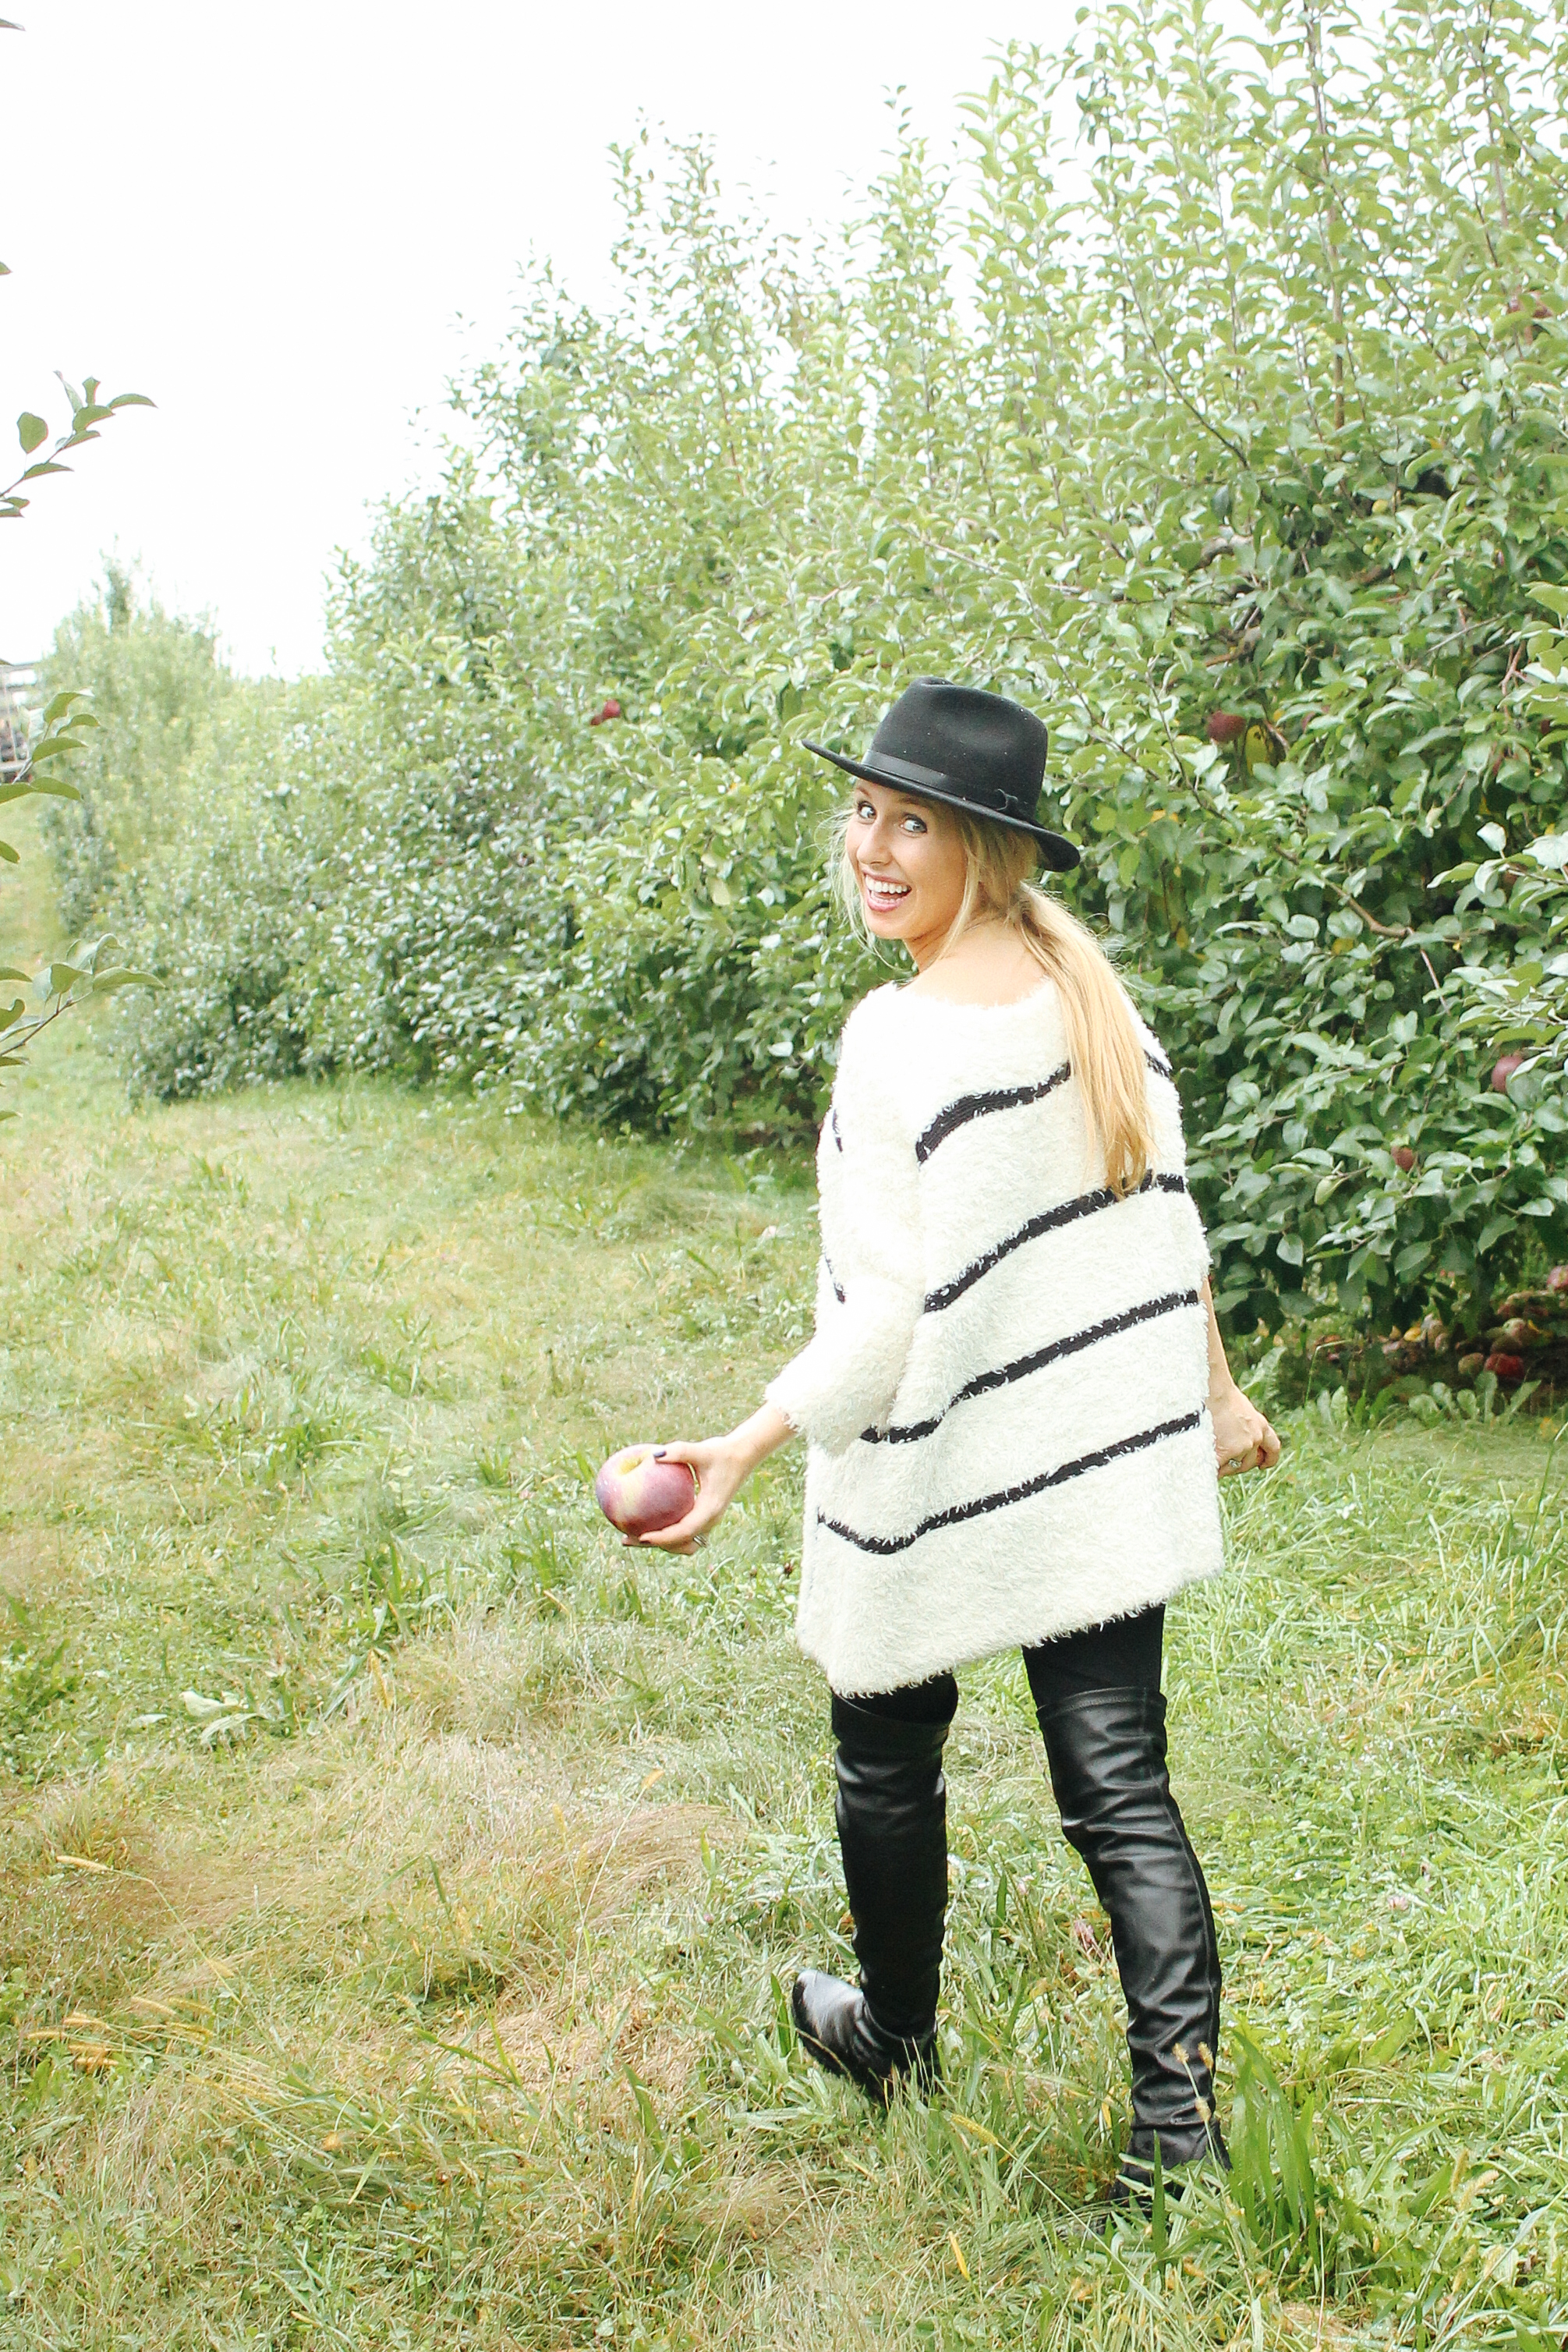 Apple Picking in the Fall